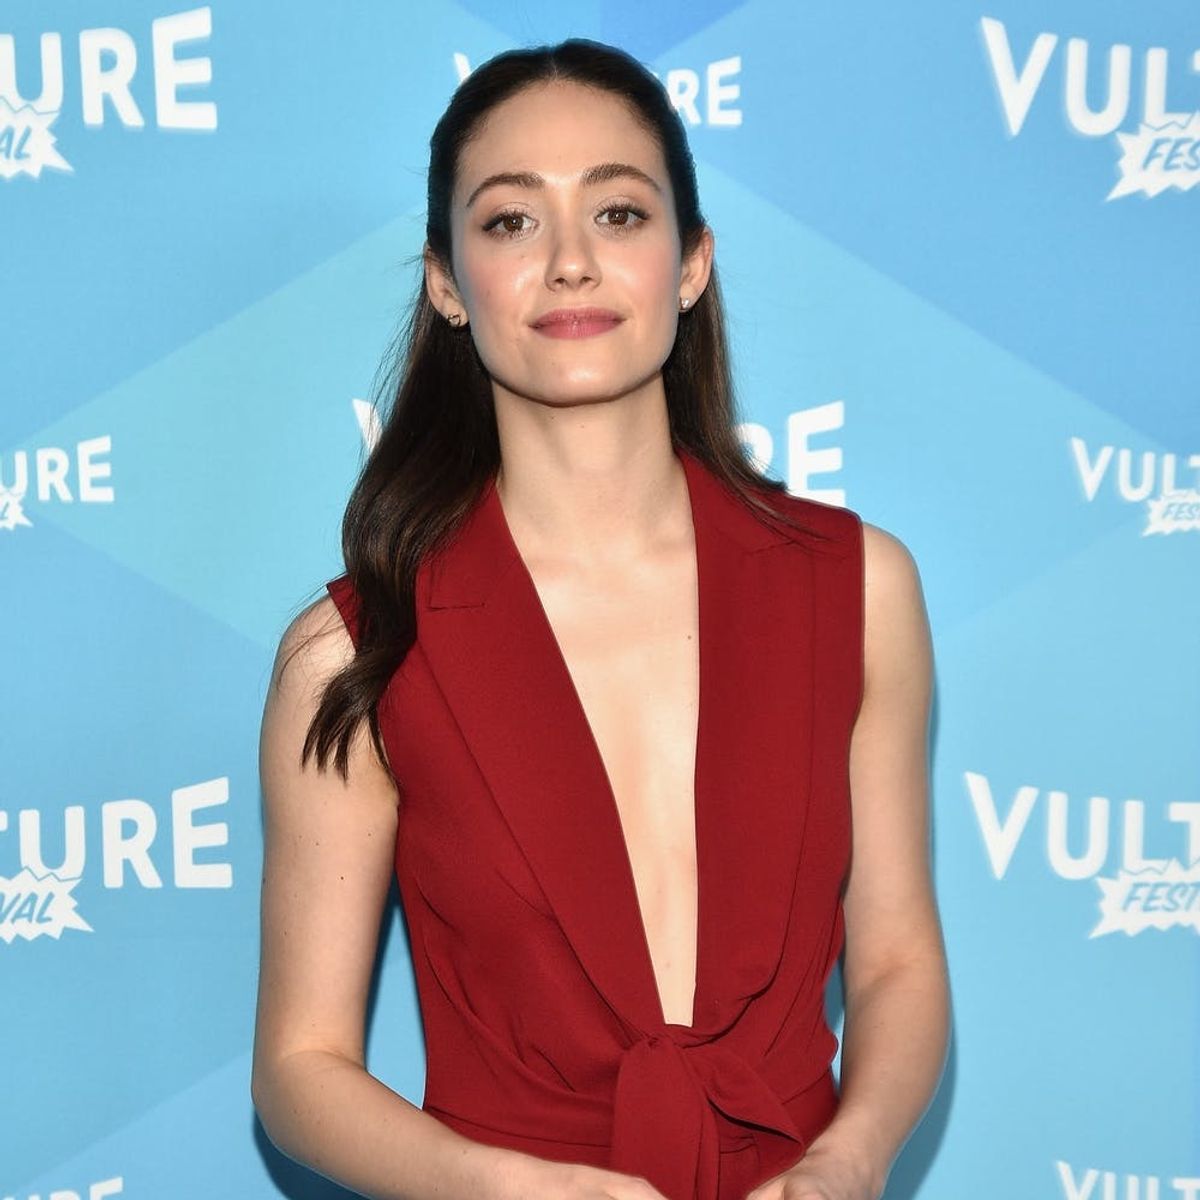 Emmy Rossum’s New Lob Haircut Is the Perfect Fall ‘Do